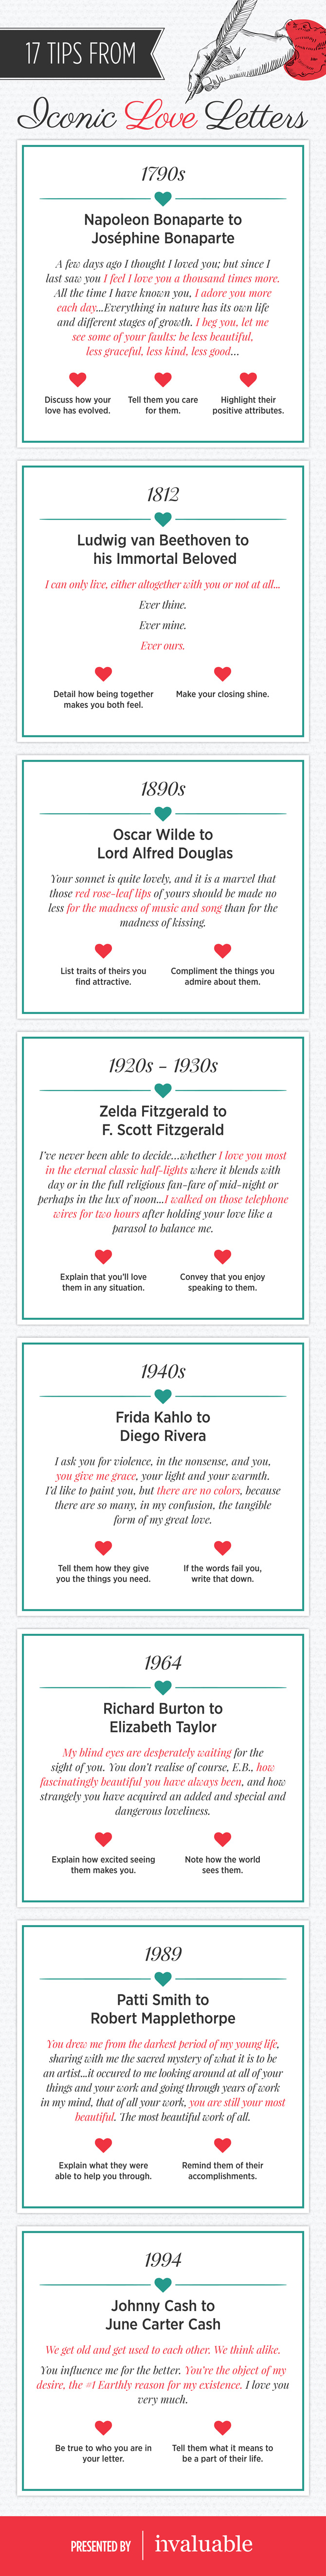 The Art of Writing Love Letters: 17 Tips from Iconic Examples - Infographic